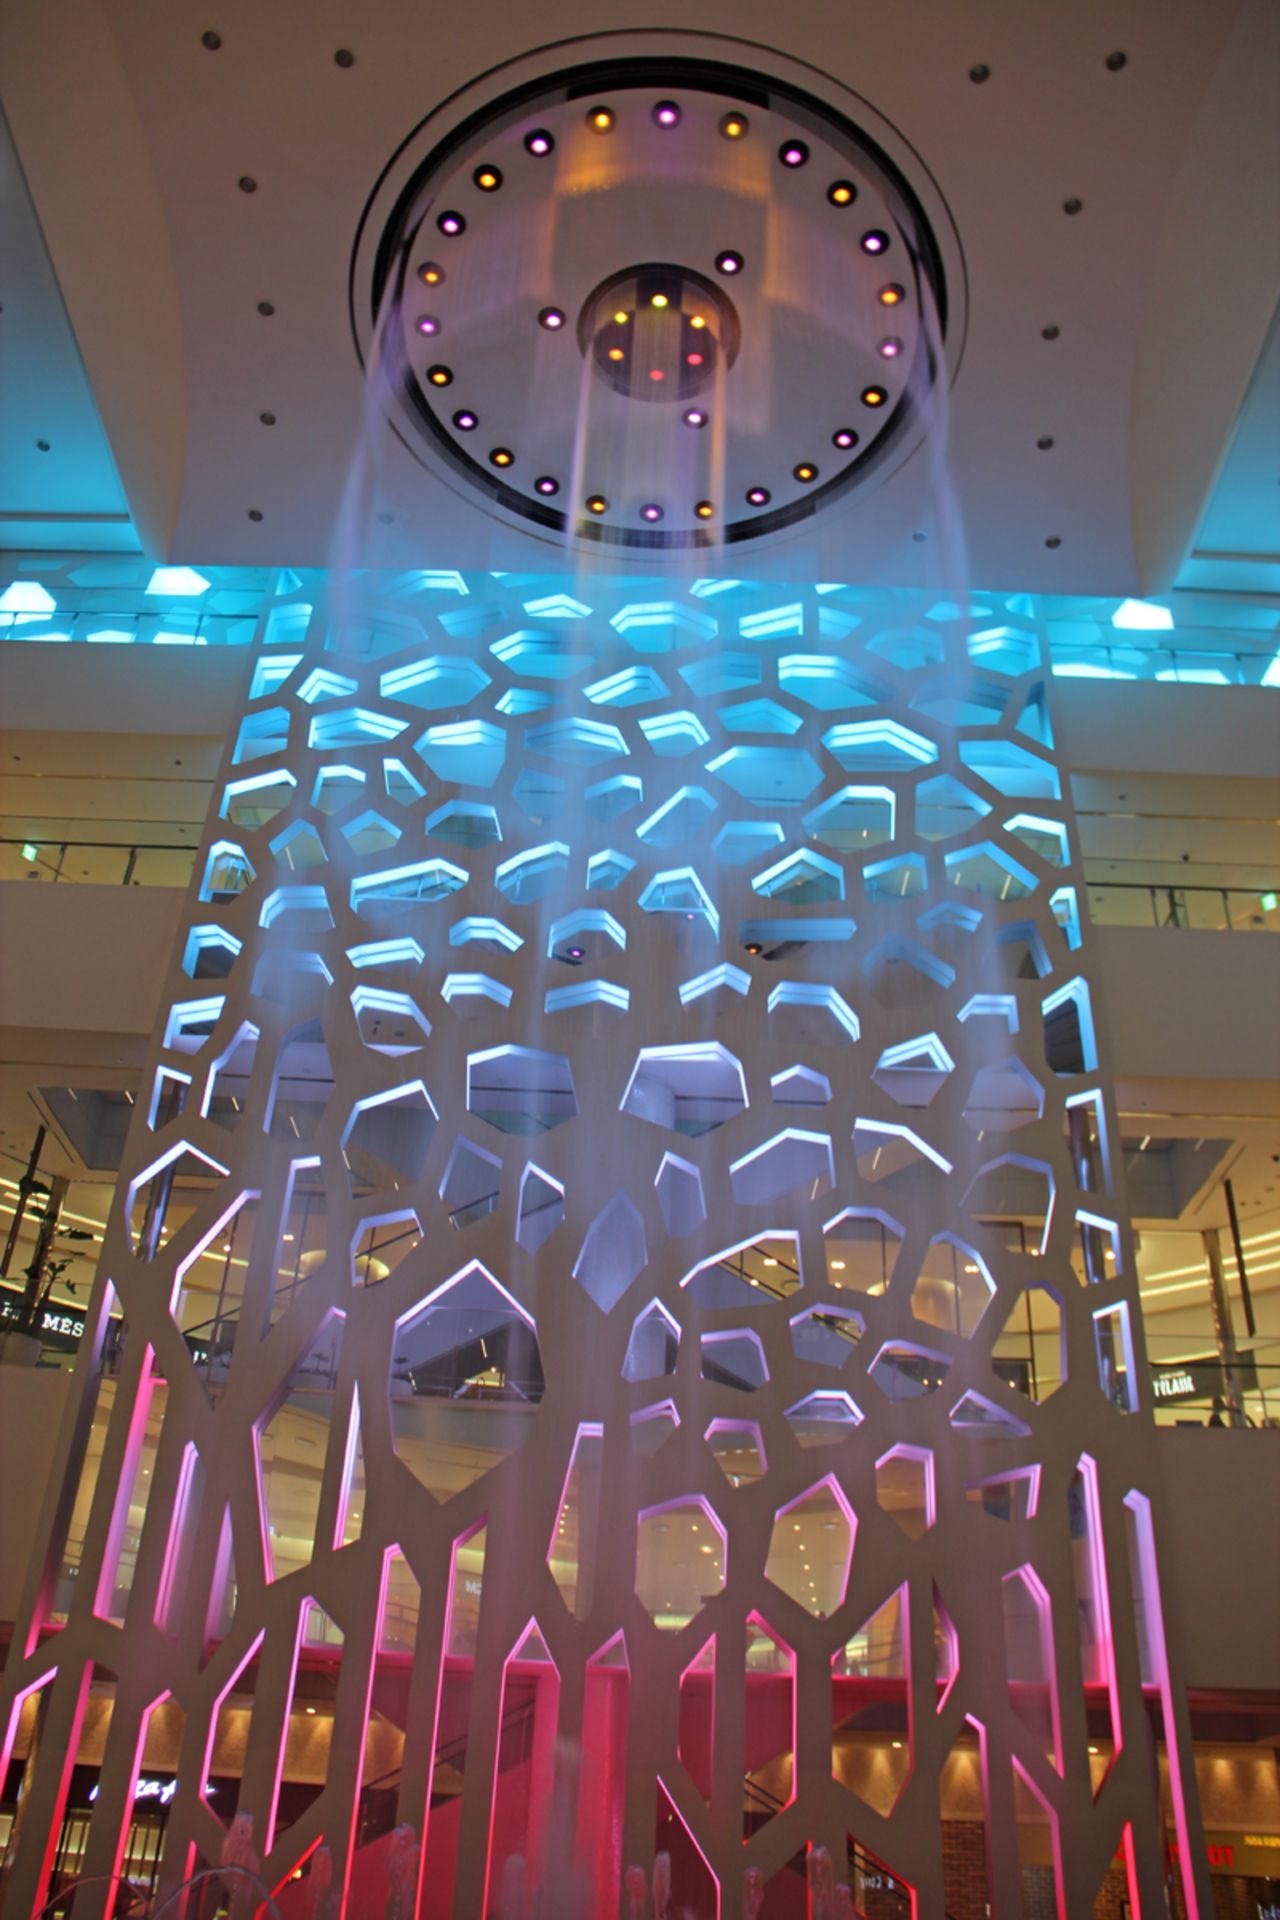 The world's tallest indoor fountain, which receives up to 20,000 visitors a day, can be found inside a Lotte Department Store in Busan, South Korea. 